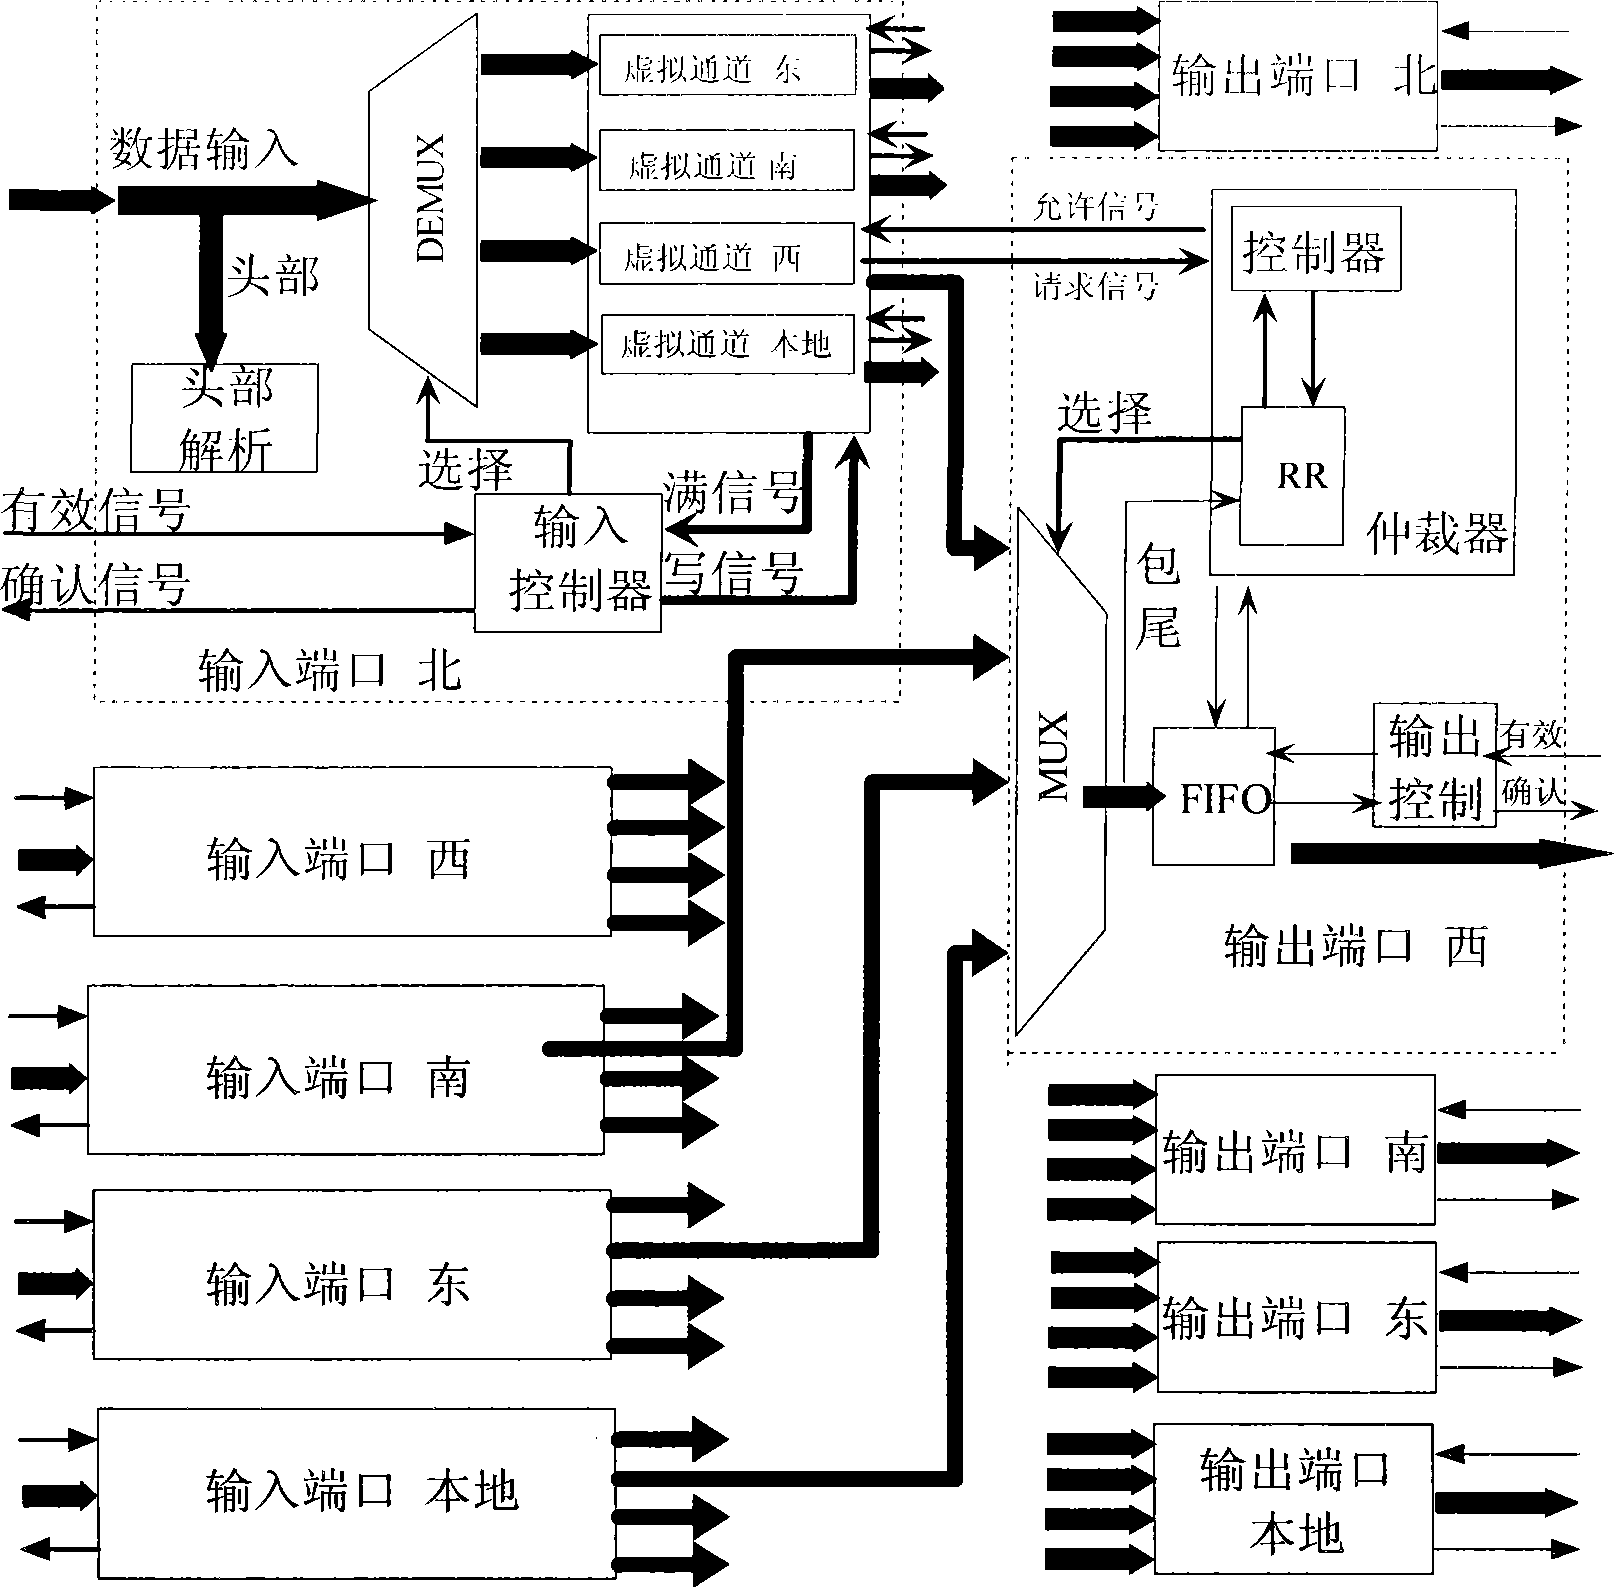 Routing node microstructure for on-chip network